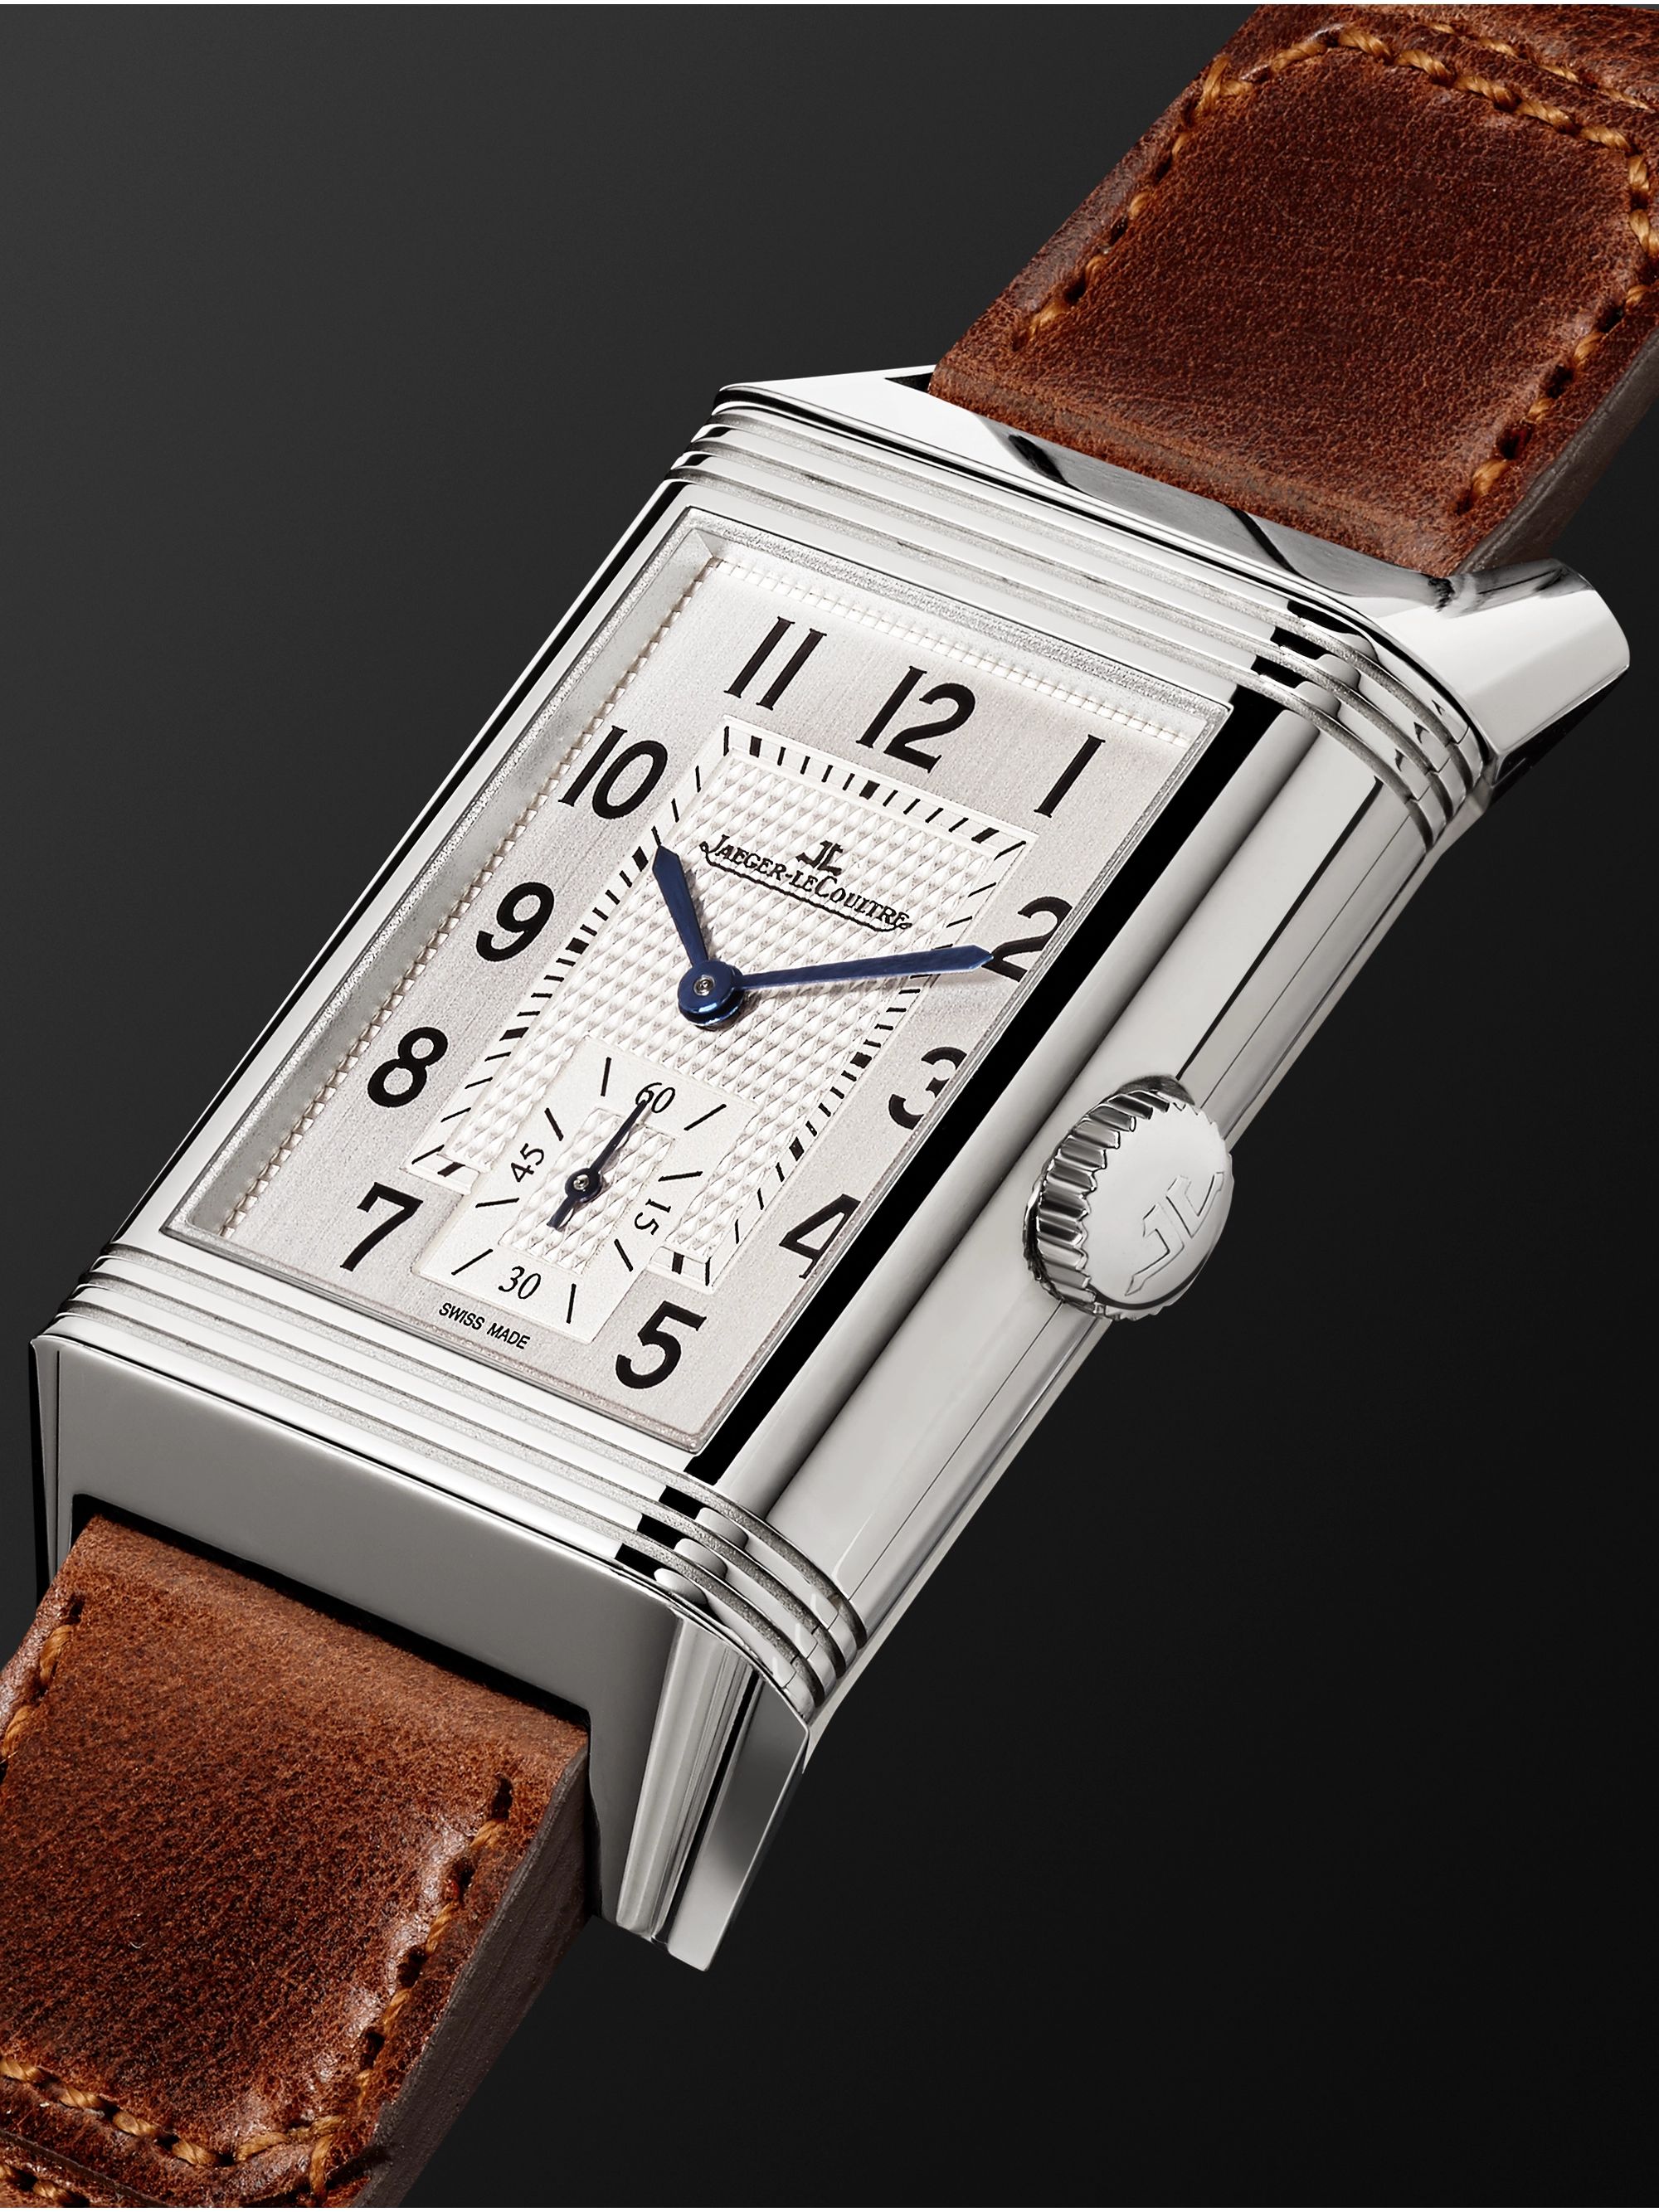 JAEGER-LECOULTRE Reverso Classic Medium Hand-Wound 25.5mm Stainless Steel and Leather Watch, Ref. No. Q2438522